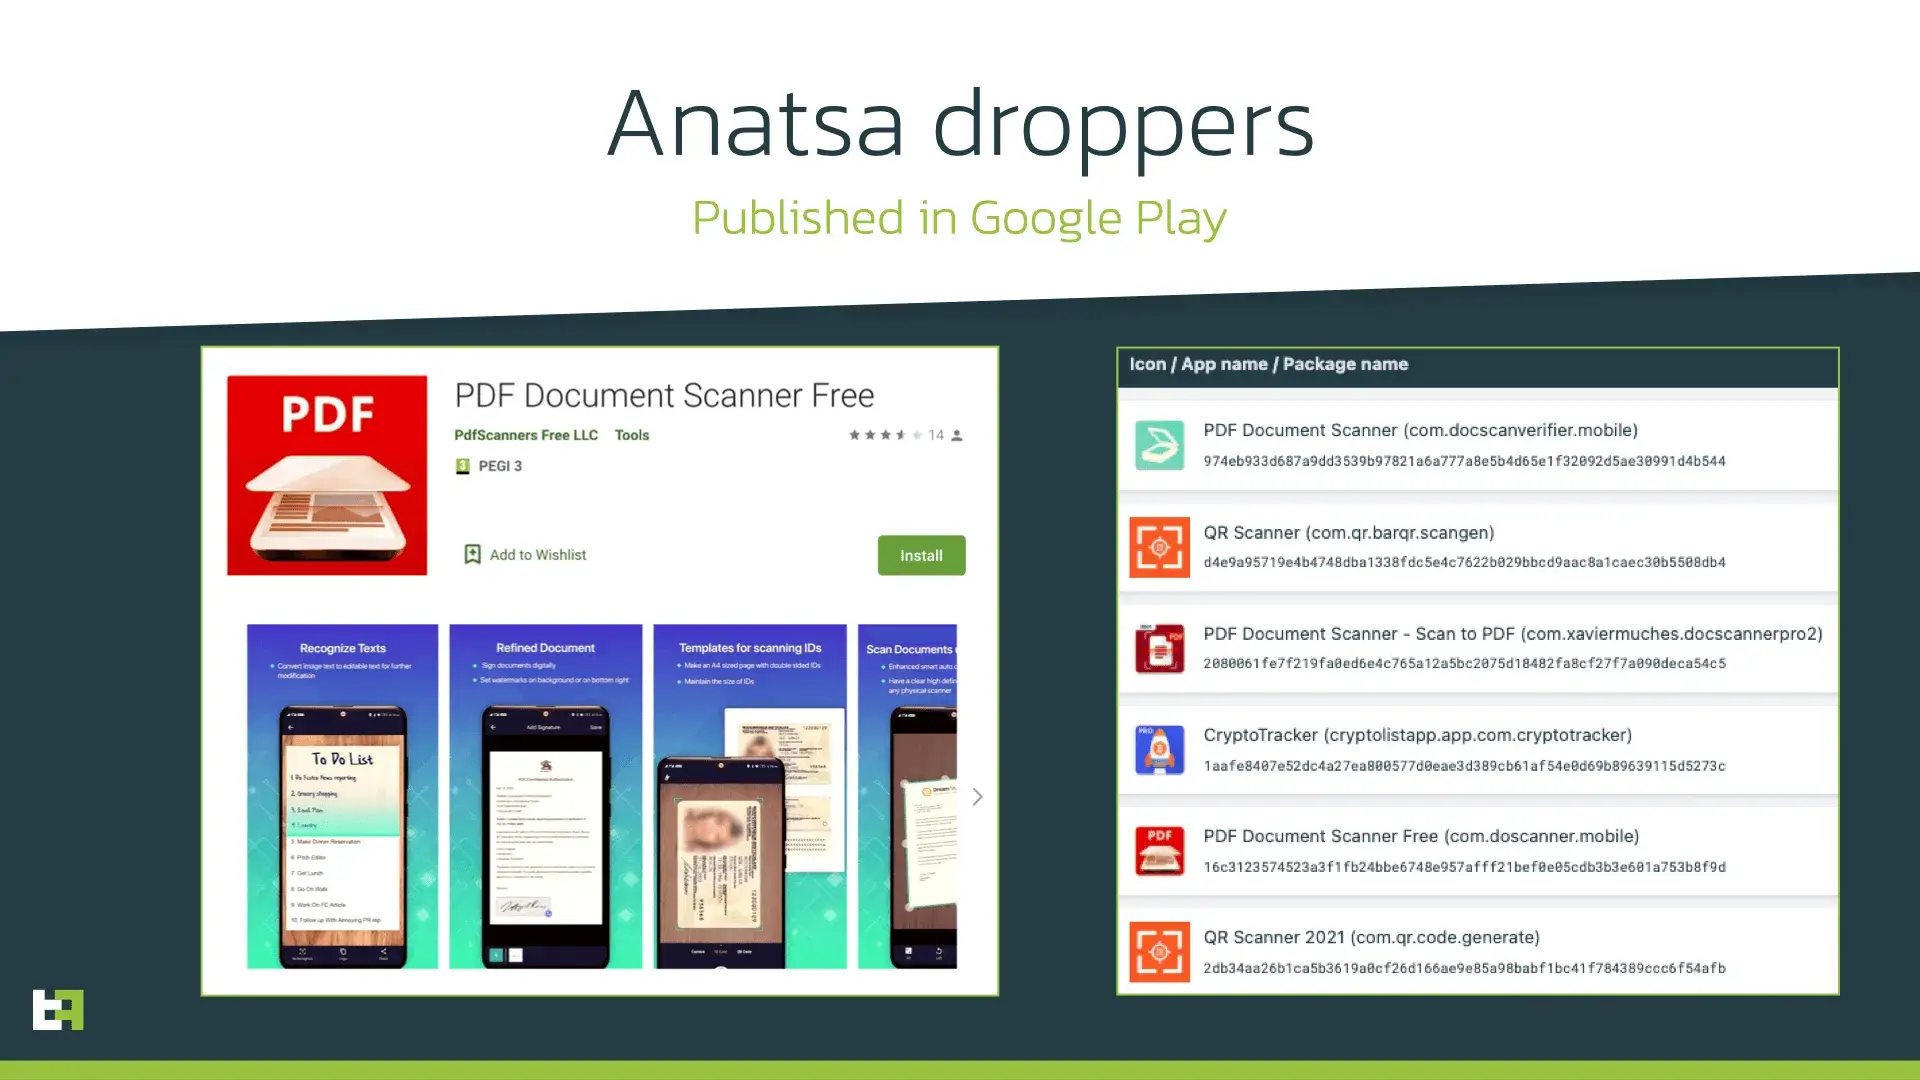 Android Apps by Fidelity Investments on Google Play